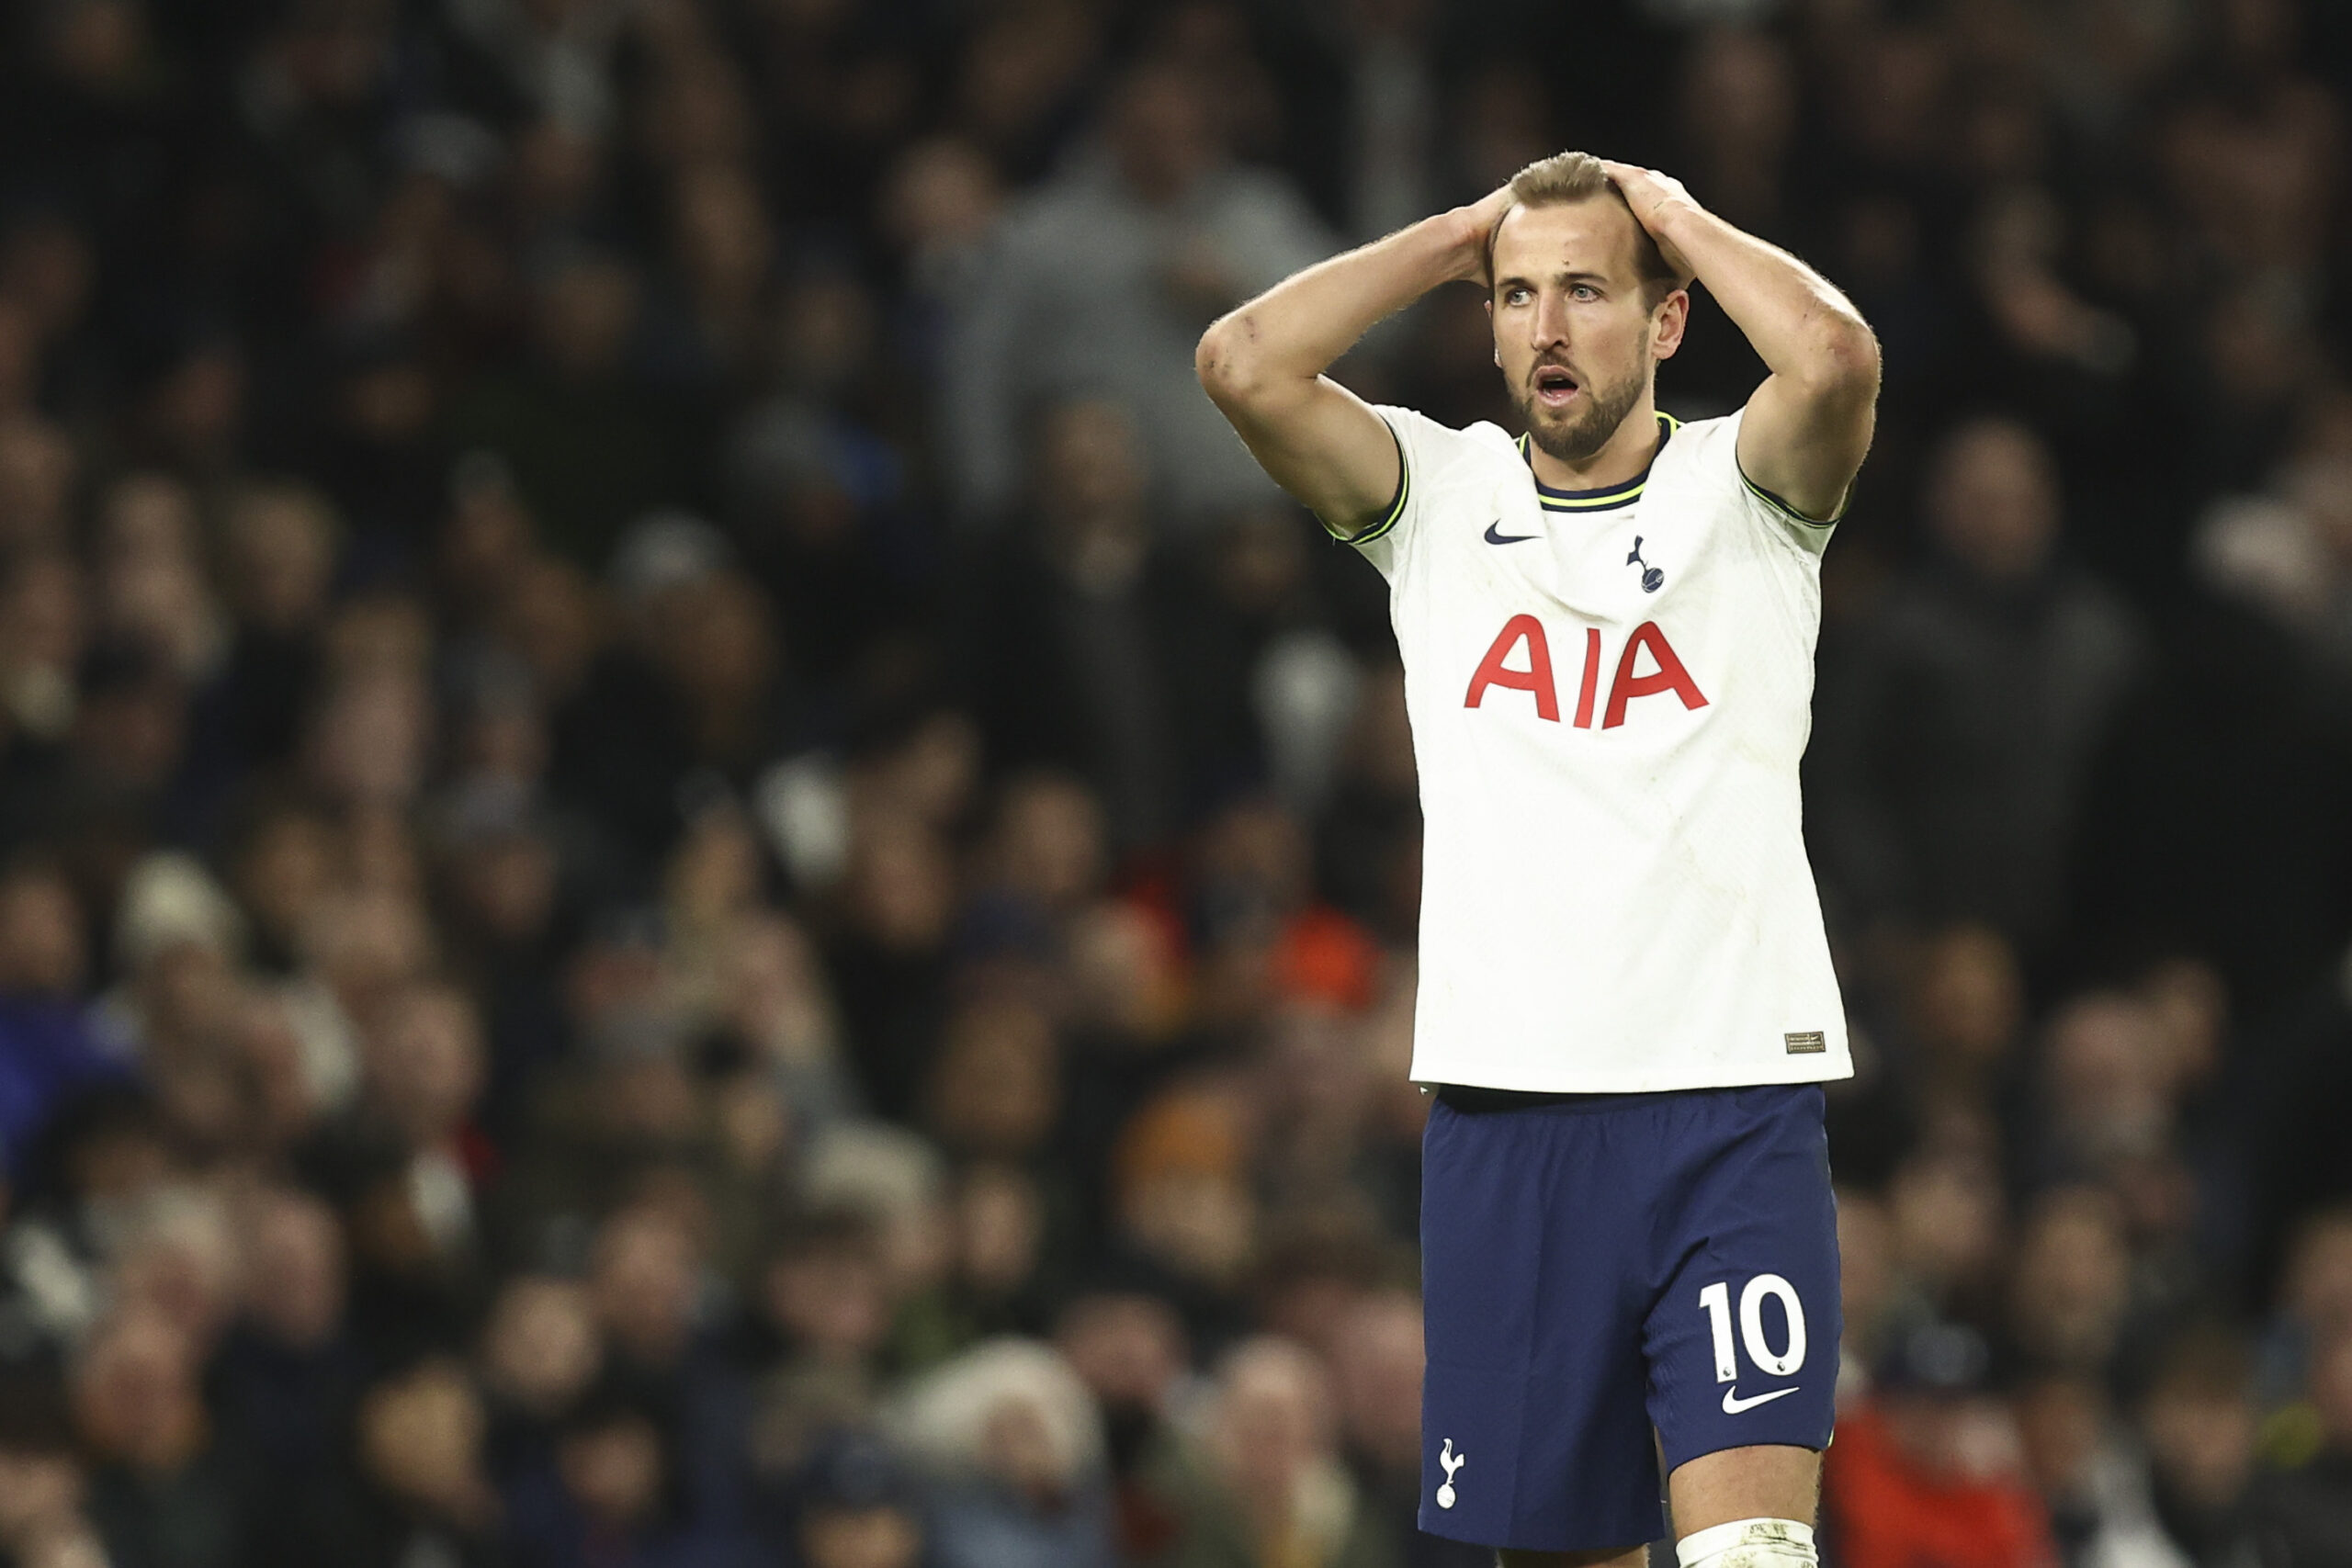 Should he stay or should he go? Harry Kane’s future remains unclear amid interest away from north London